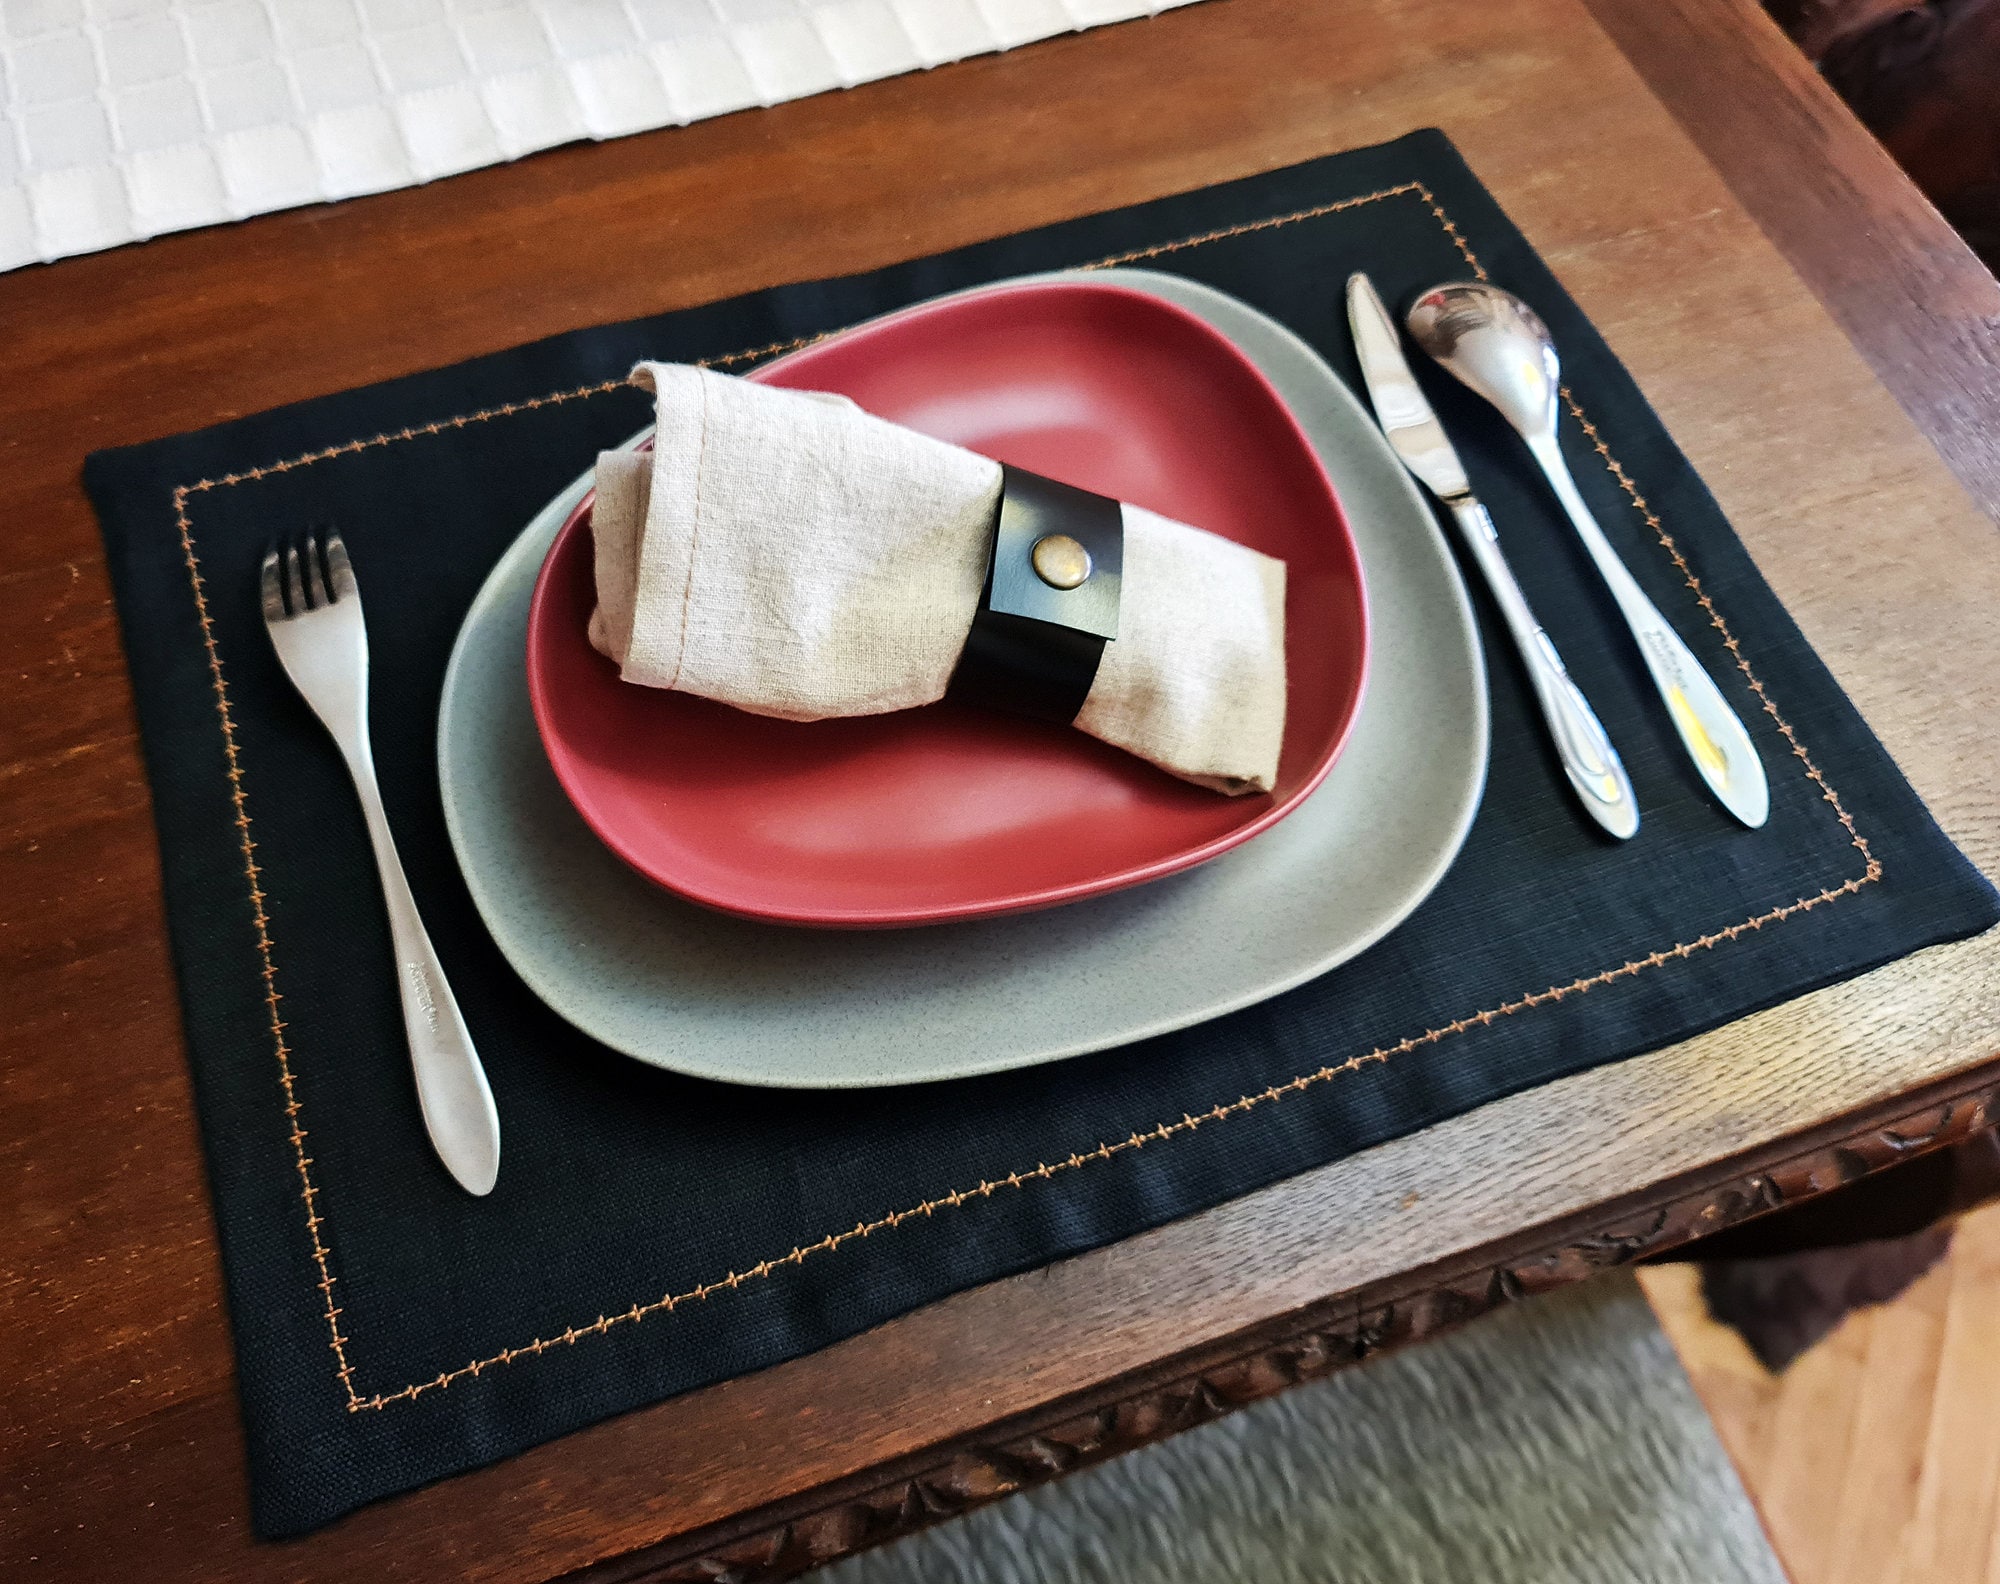 Trendy Moon Faux Leather Placemats Set of 6 for Dinner Table,PU Table  Mats，Waterproof，Heat & Stain Resistant,Non-Slip Easy to Clean for Kitchen  Dining